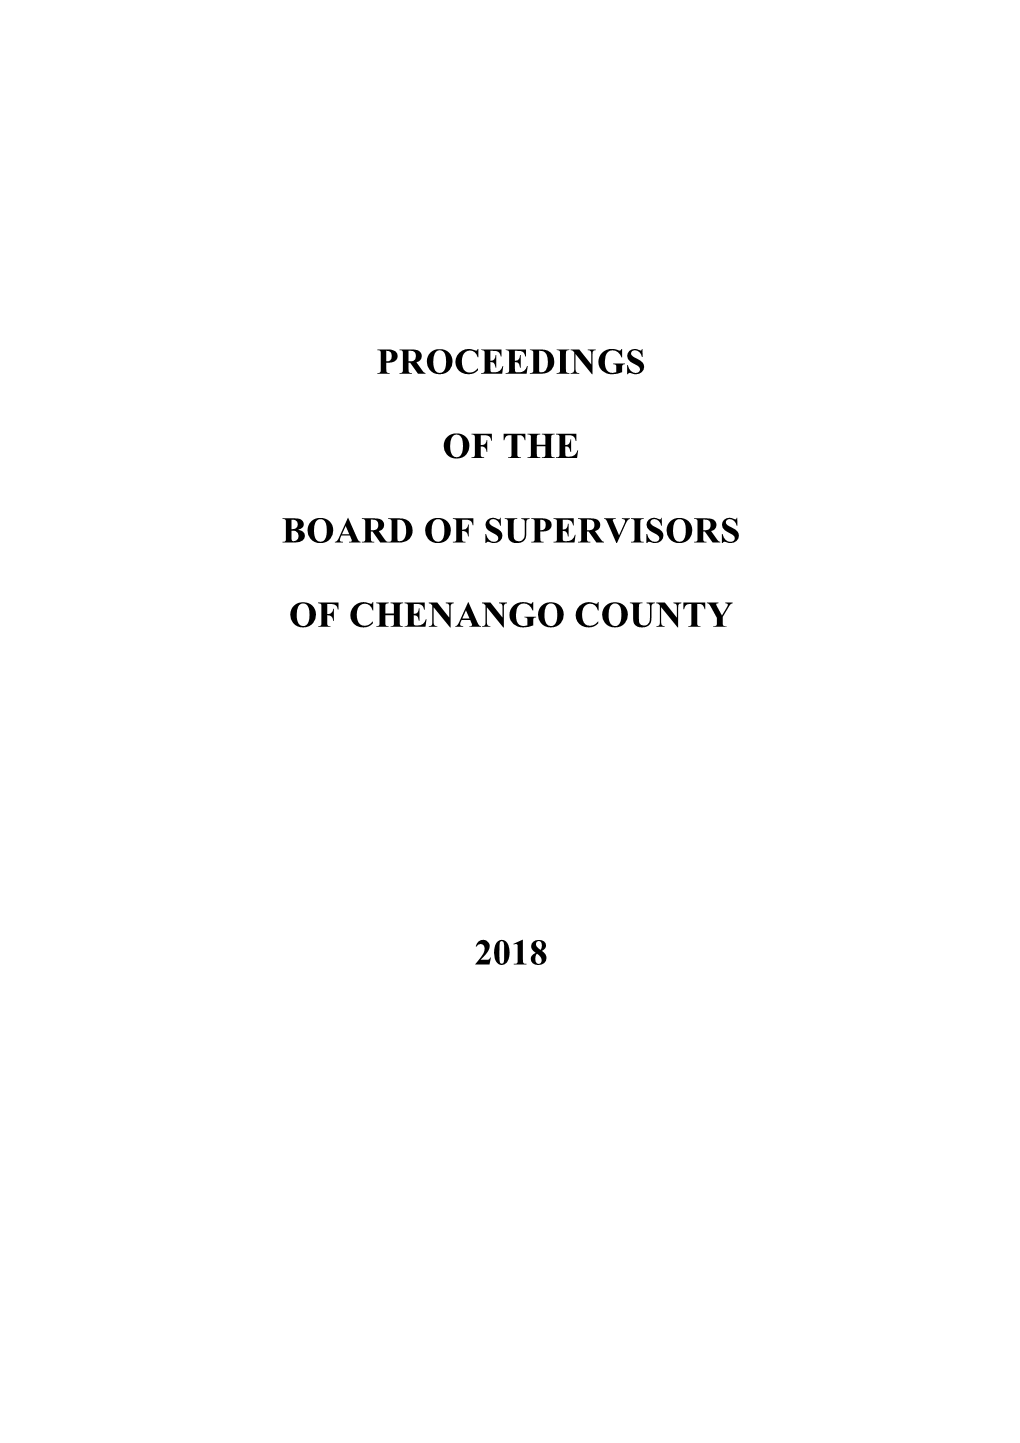 Proceedings of the Board of Supervisors 2018